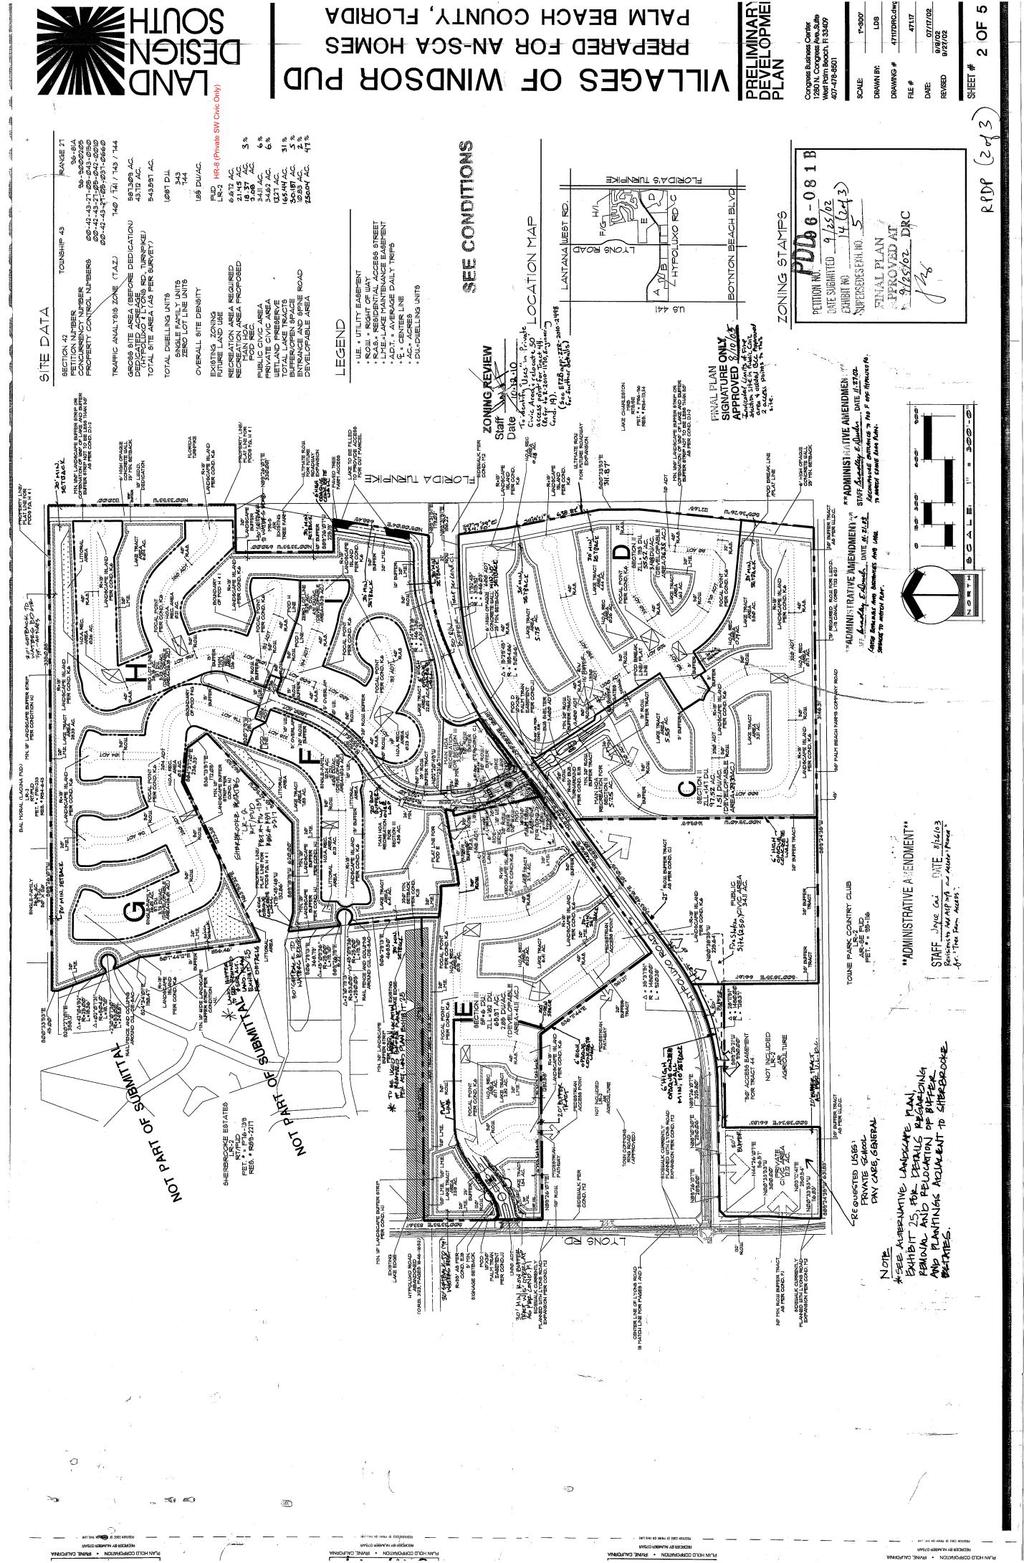 Figure 5 Preliminary Master Plan dated January